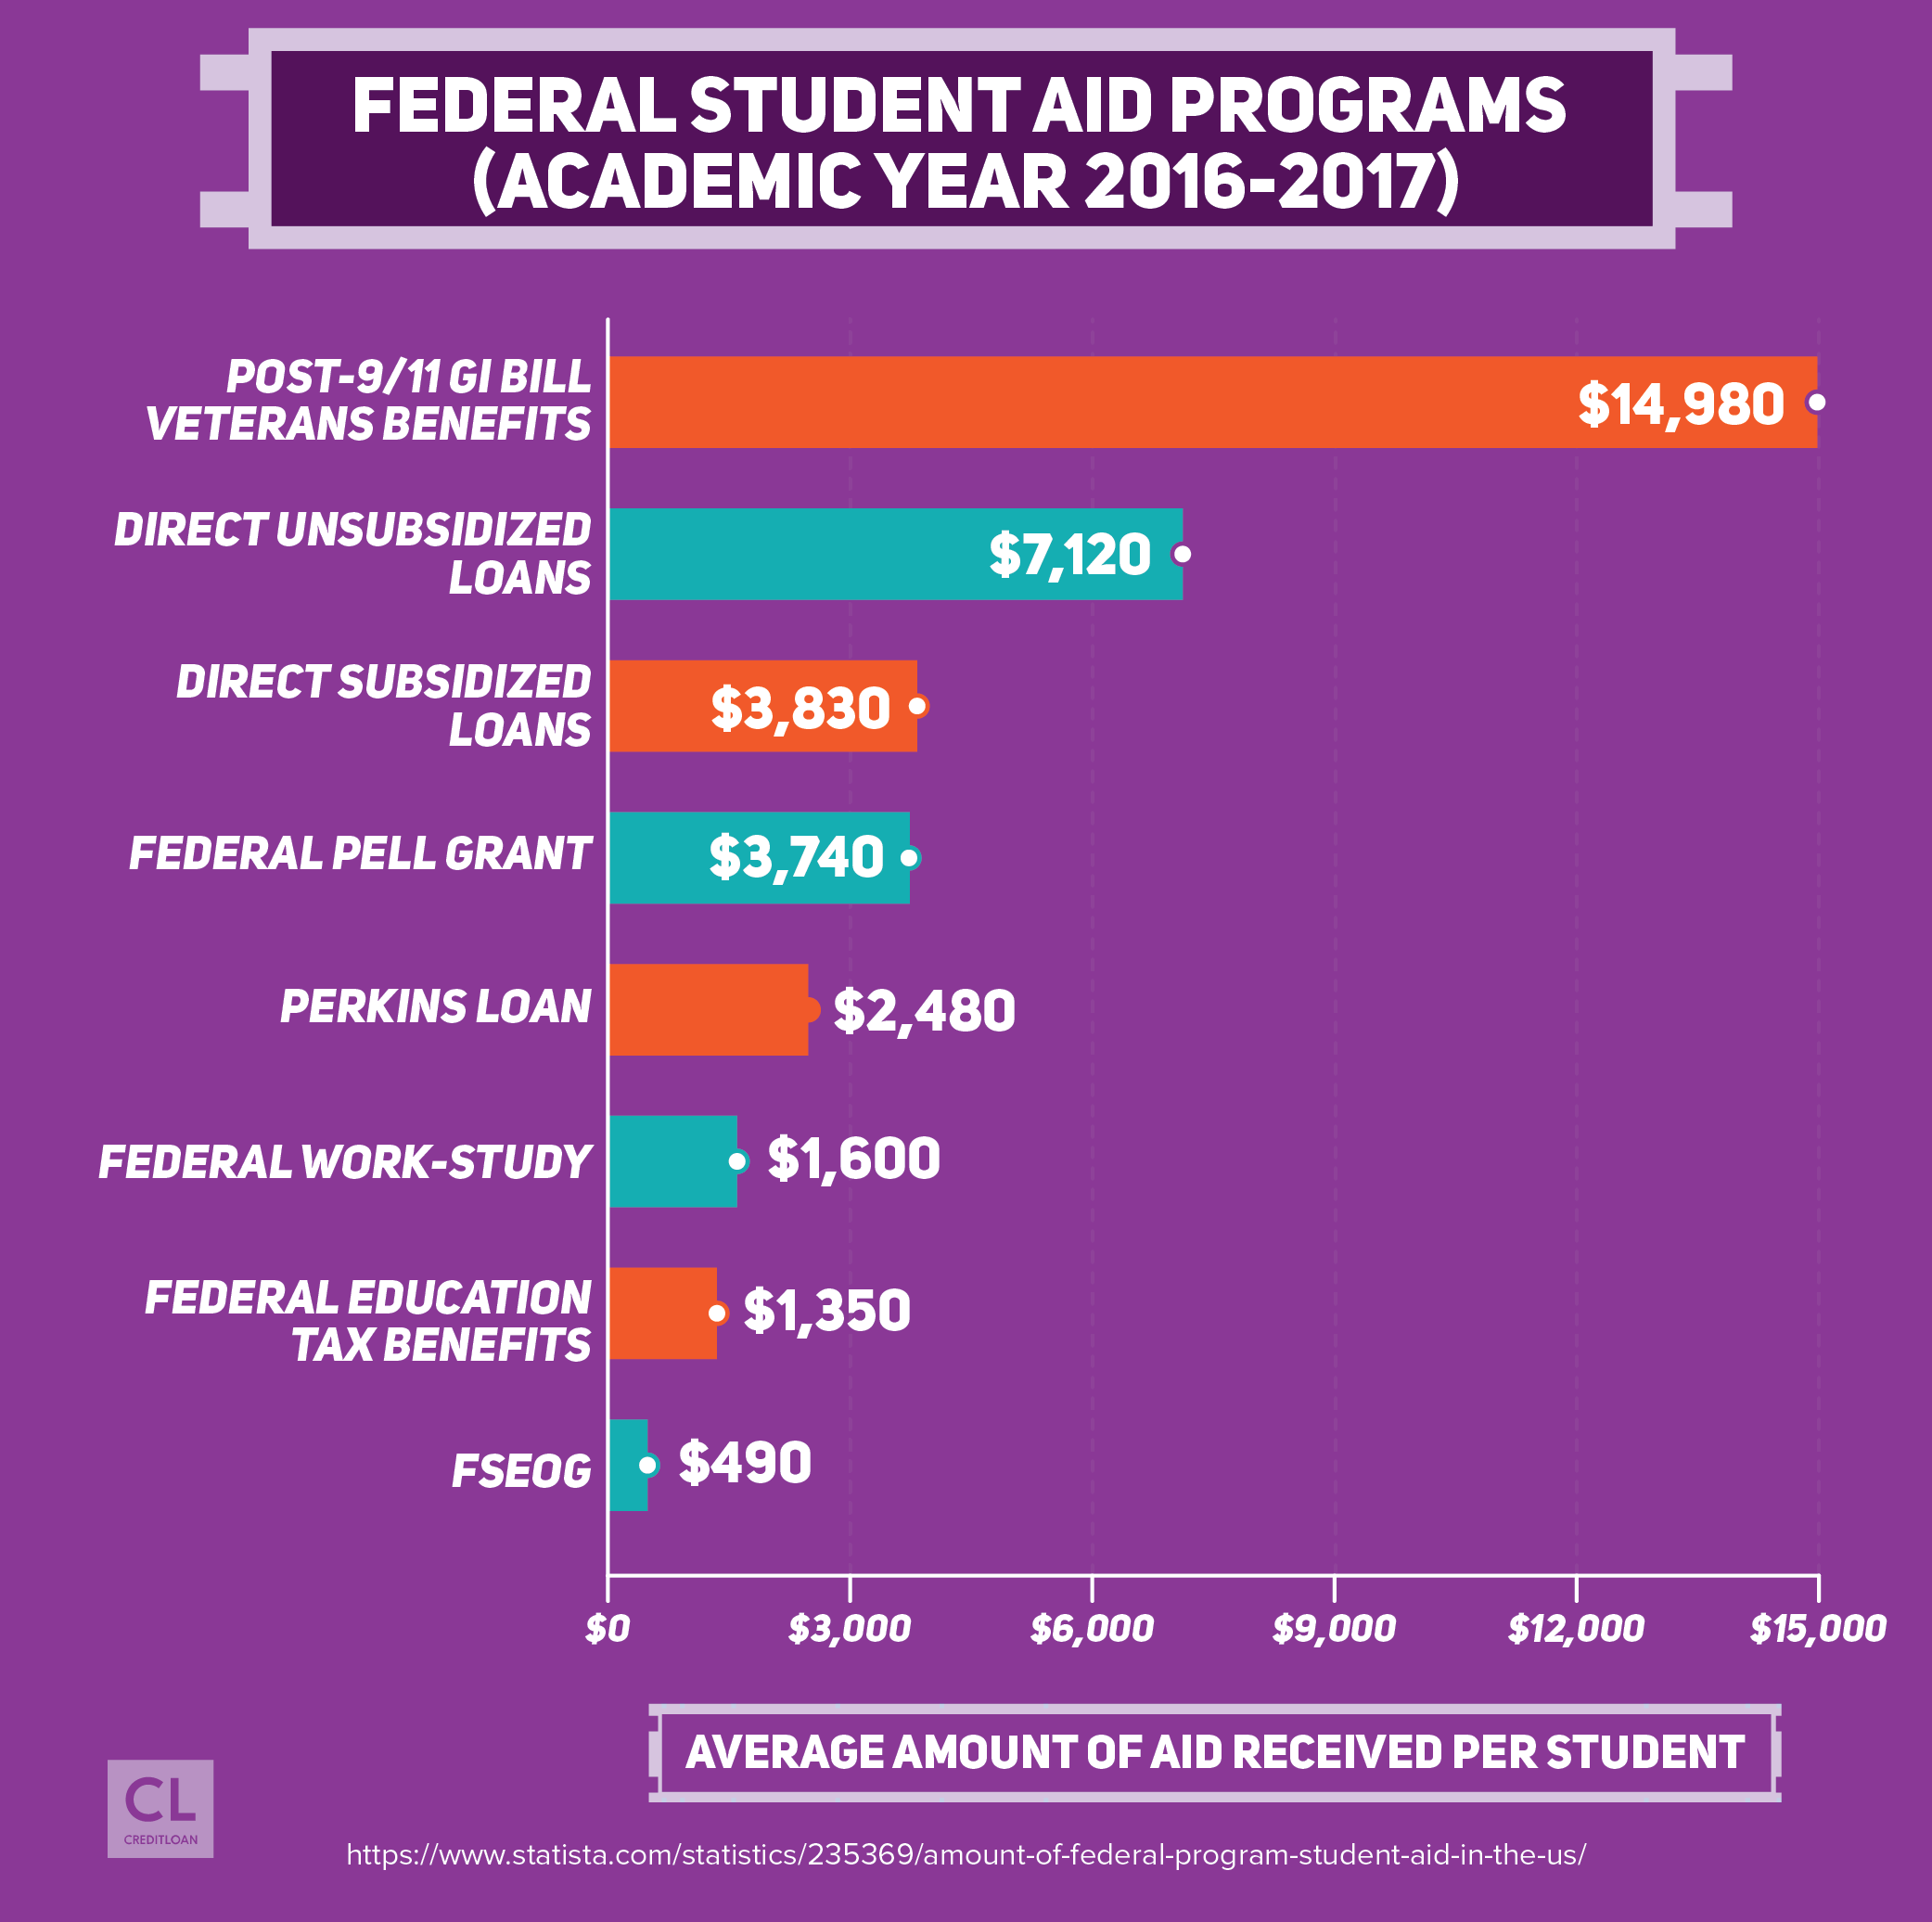 Federal Student Aid Programs (Academic Year 2016-2017)